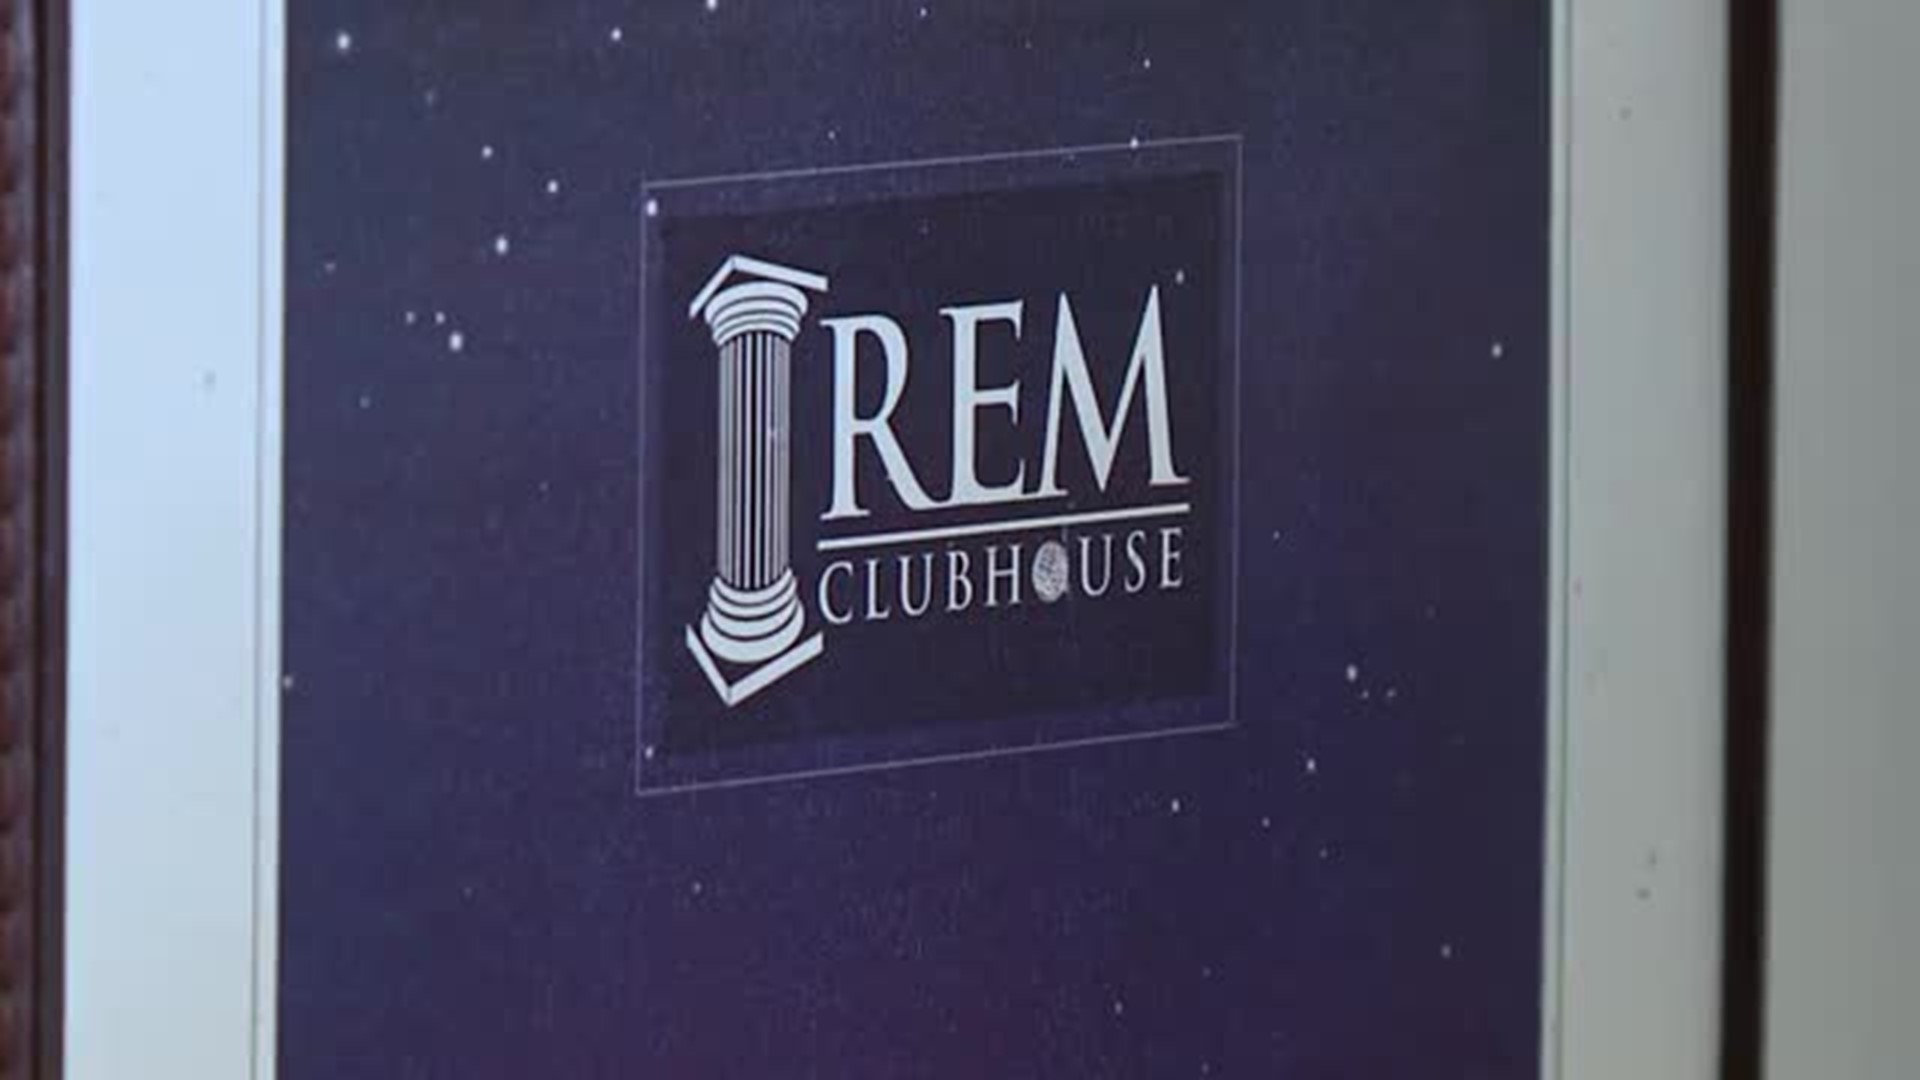 Irem Clubhouse/Crab Cakes